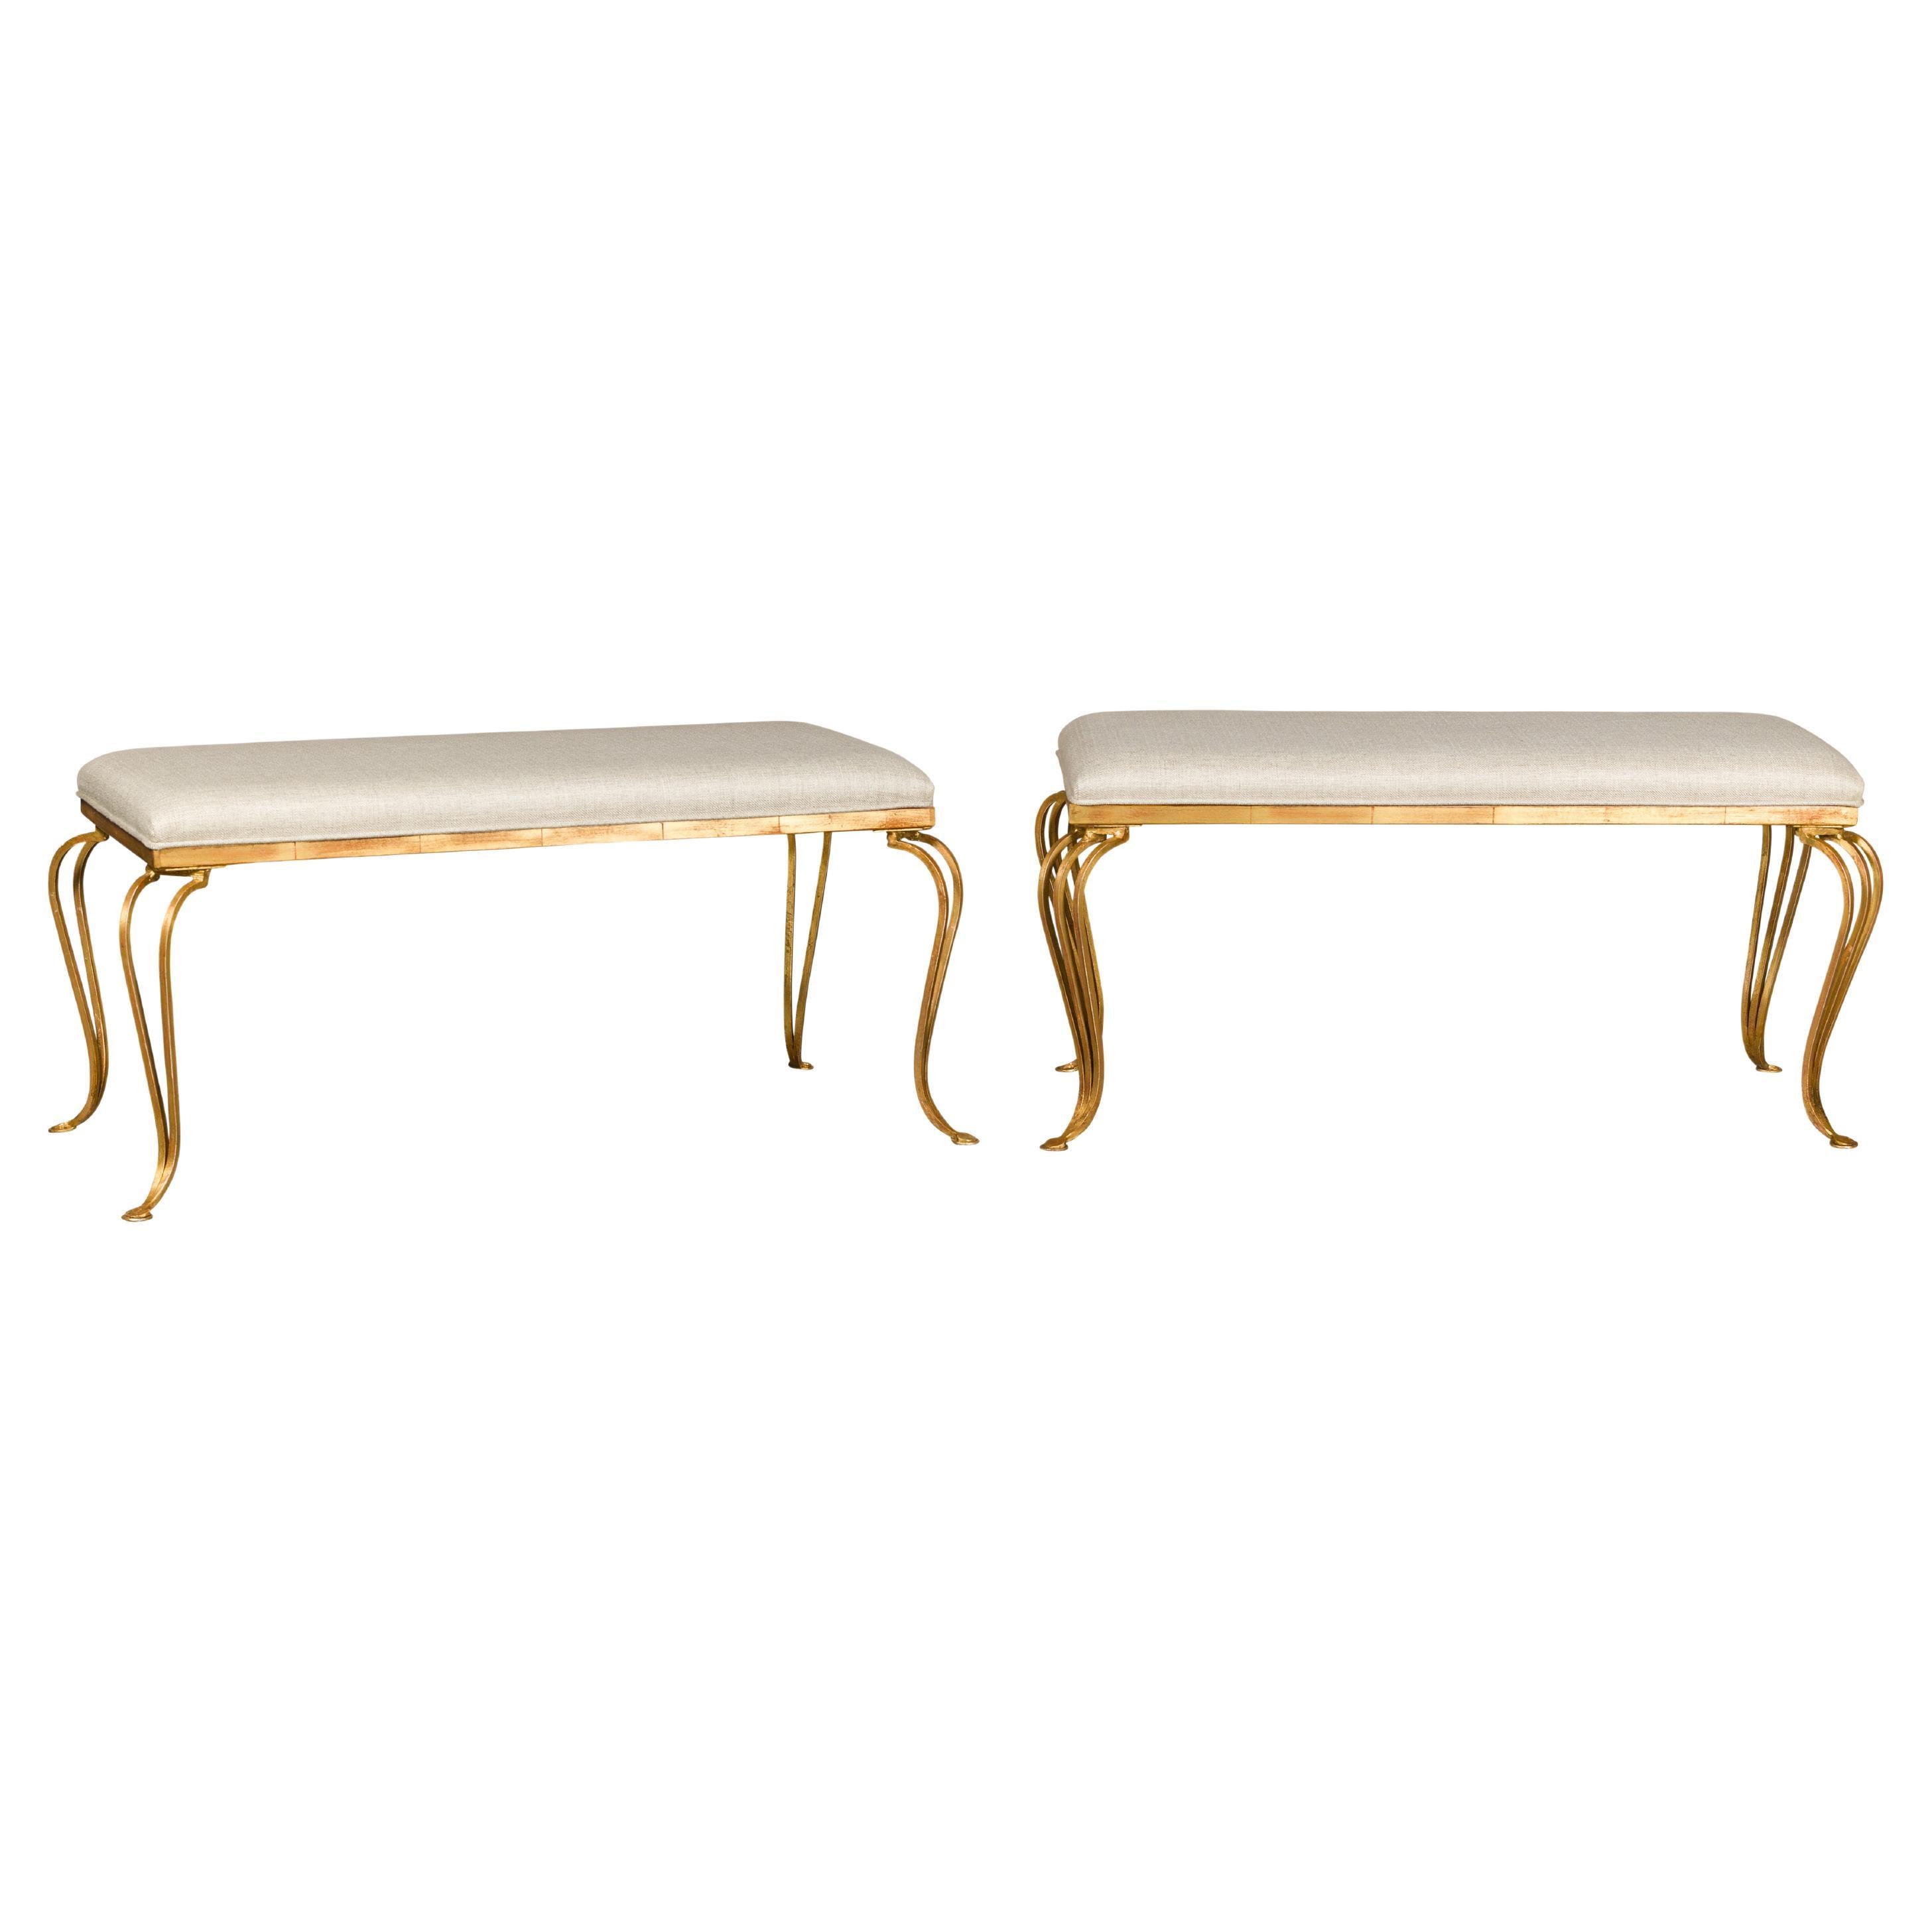 Midcentury French Gilt Metal Benches with Cabriole Legs and Upholstery, a Pair For Sale